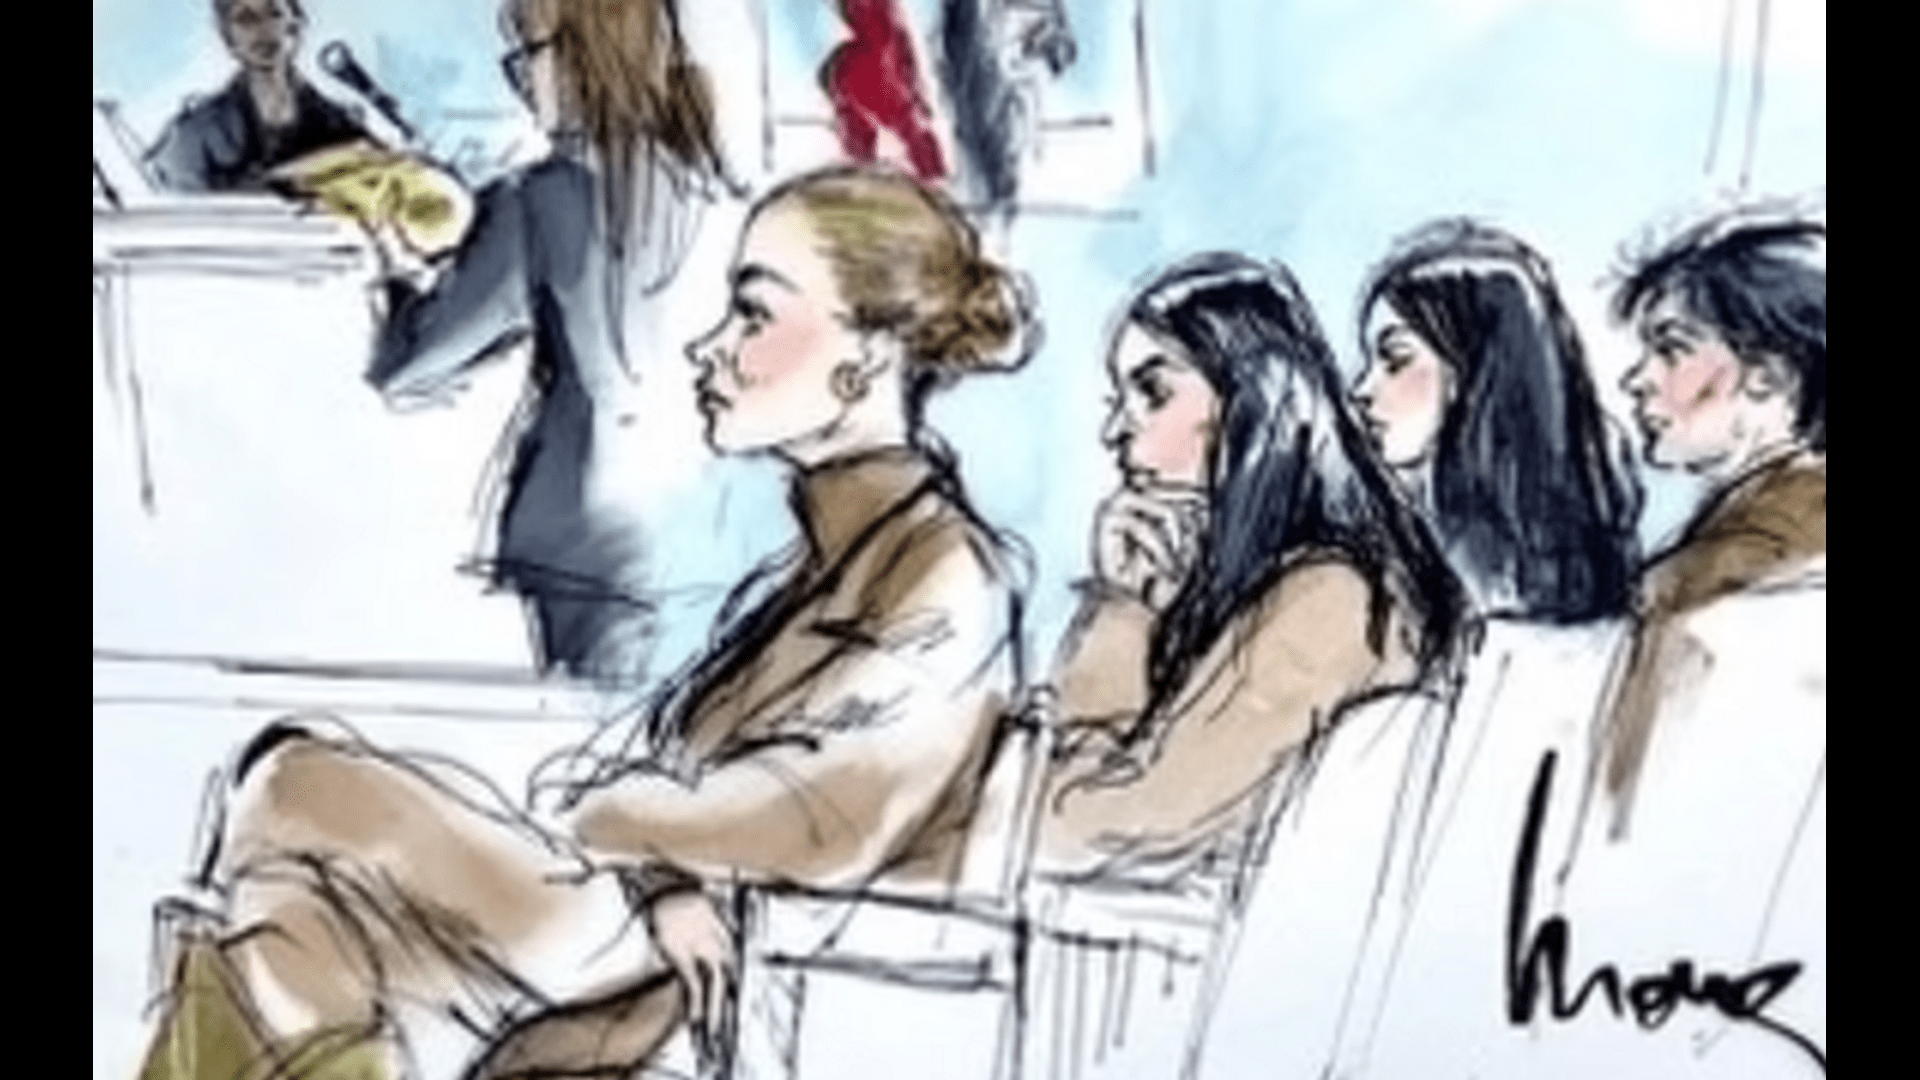 the-kardashian-sisters-are-going-to-sue-the-artist-who-depicted-them-in-a-caricature